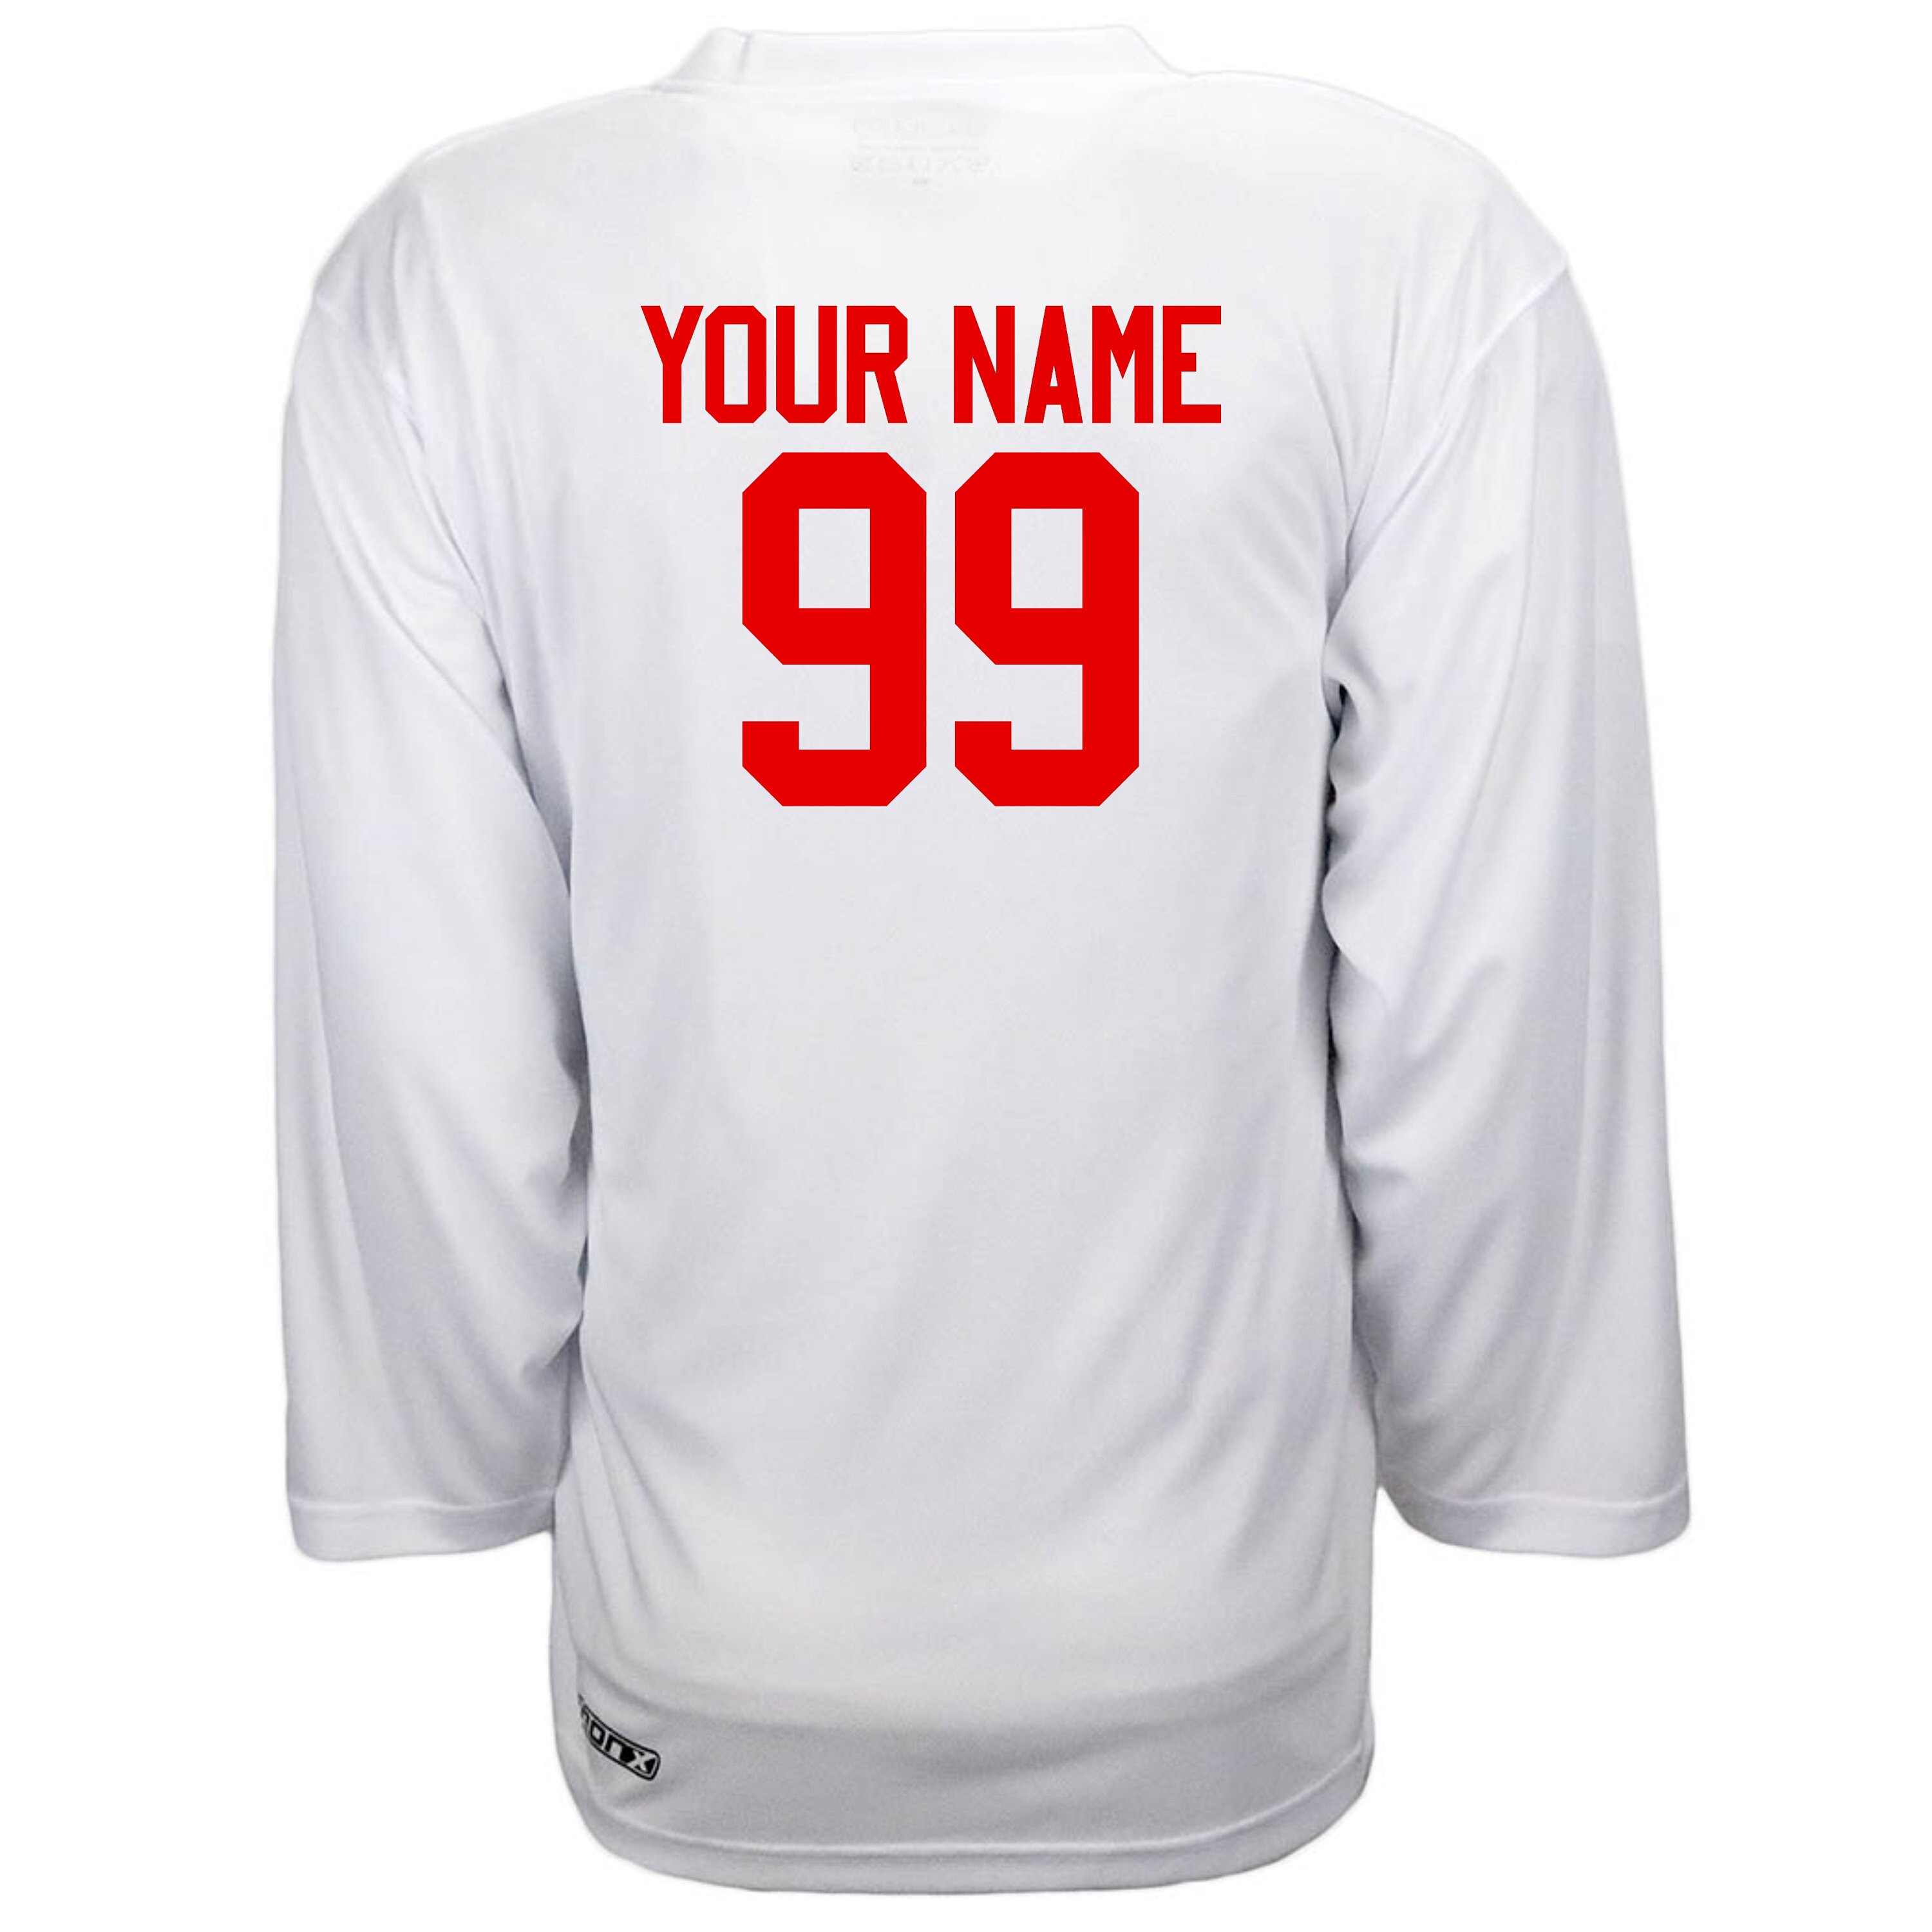 Custom Made in Canada Graphic on Hockey Jersey Customized Name 